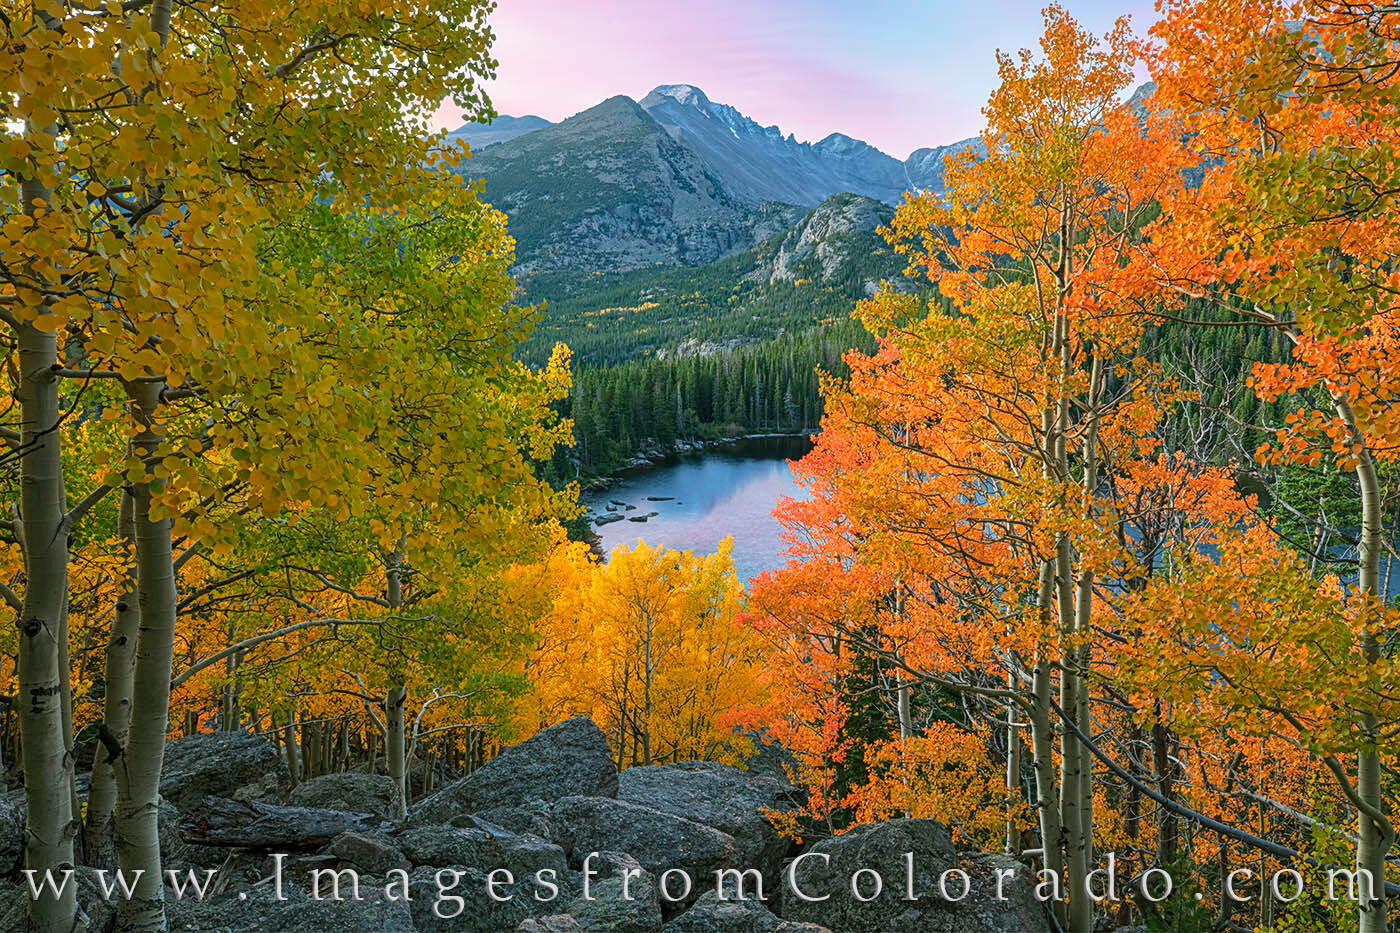 The vibrant colors of fall in Rocky Mountain National Park highlight a beautiful scene of Bear Lake and Longs Peak in the distance...